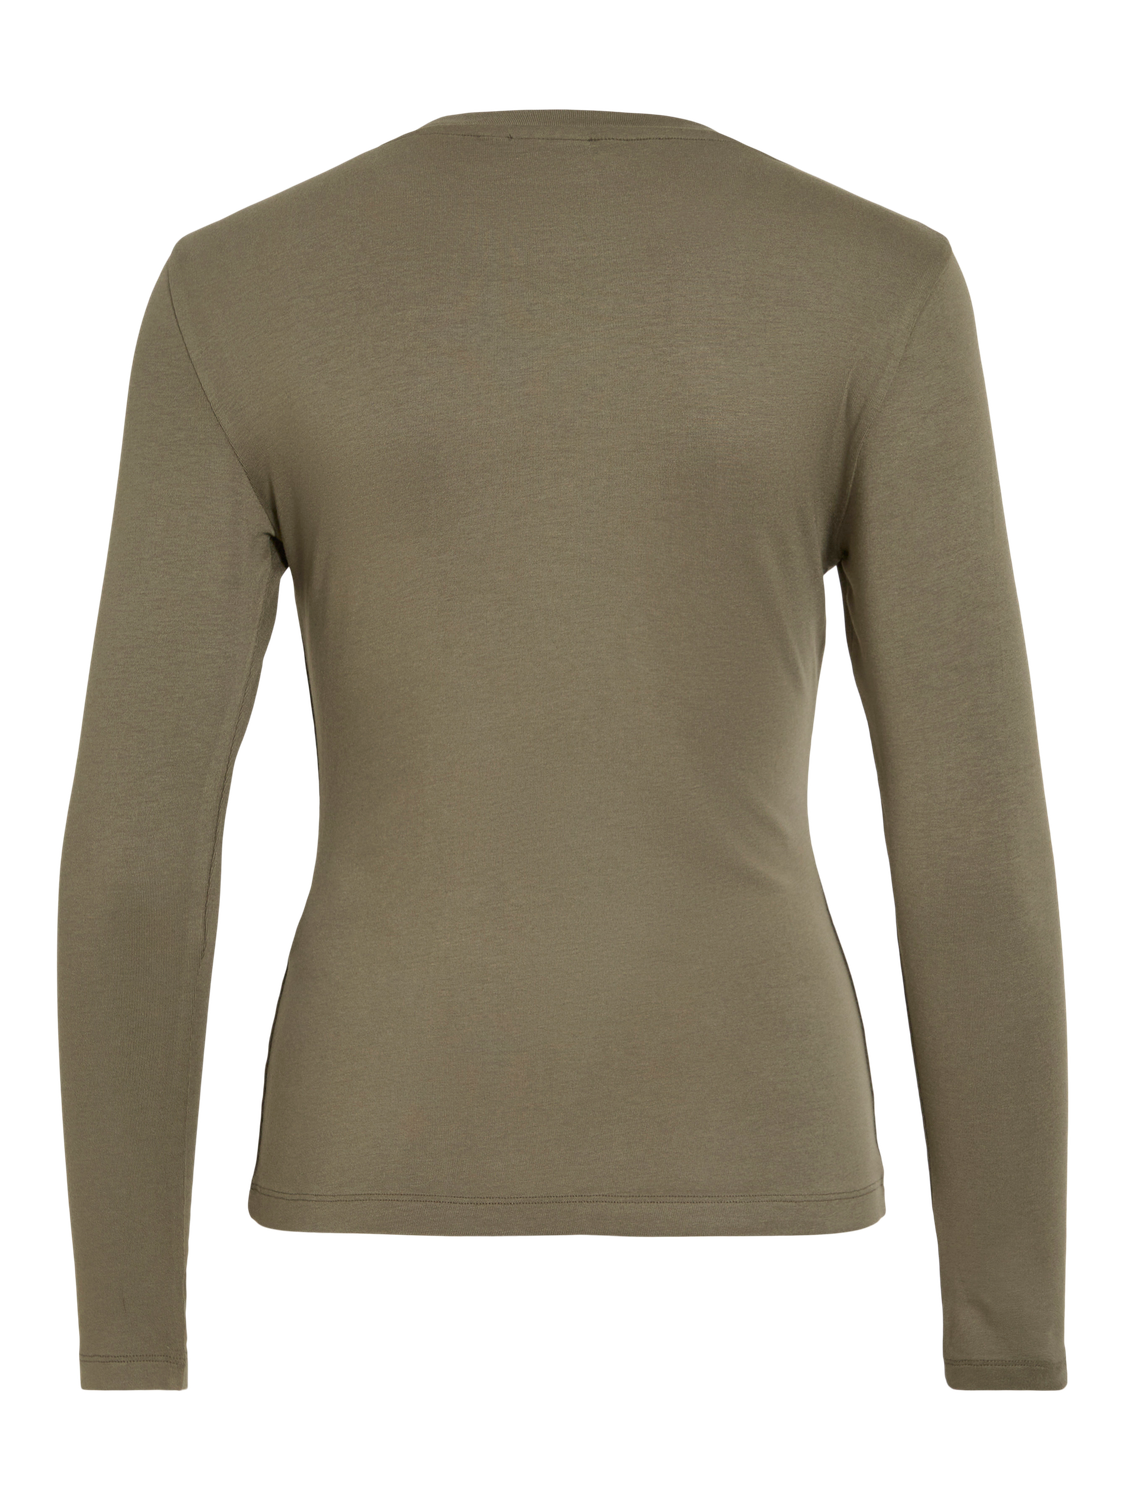 VIALEXIA Shirt - Dusty Olive